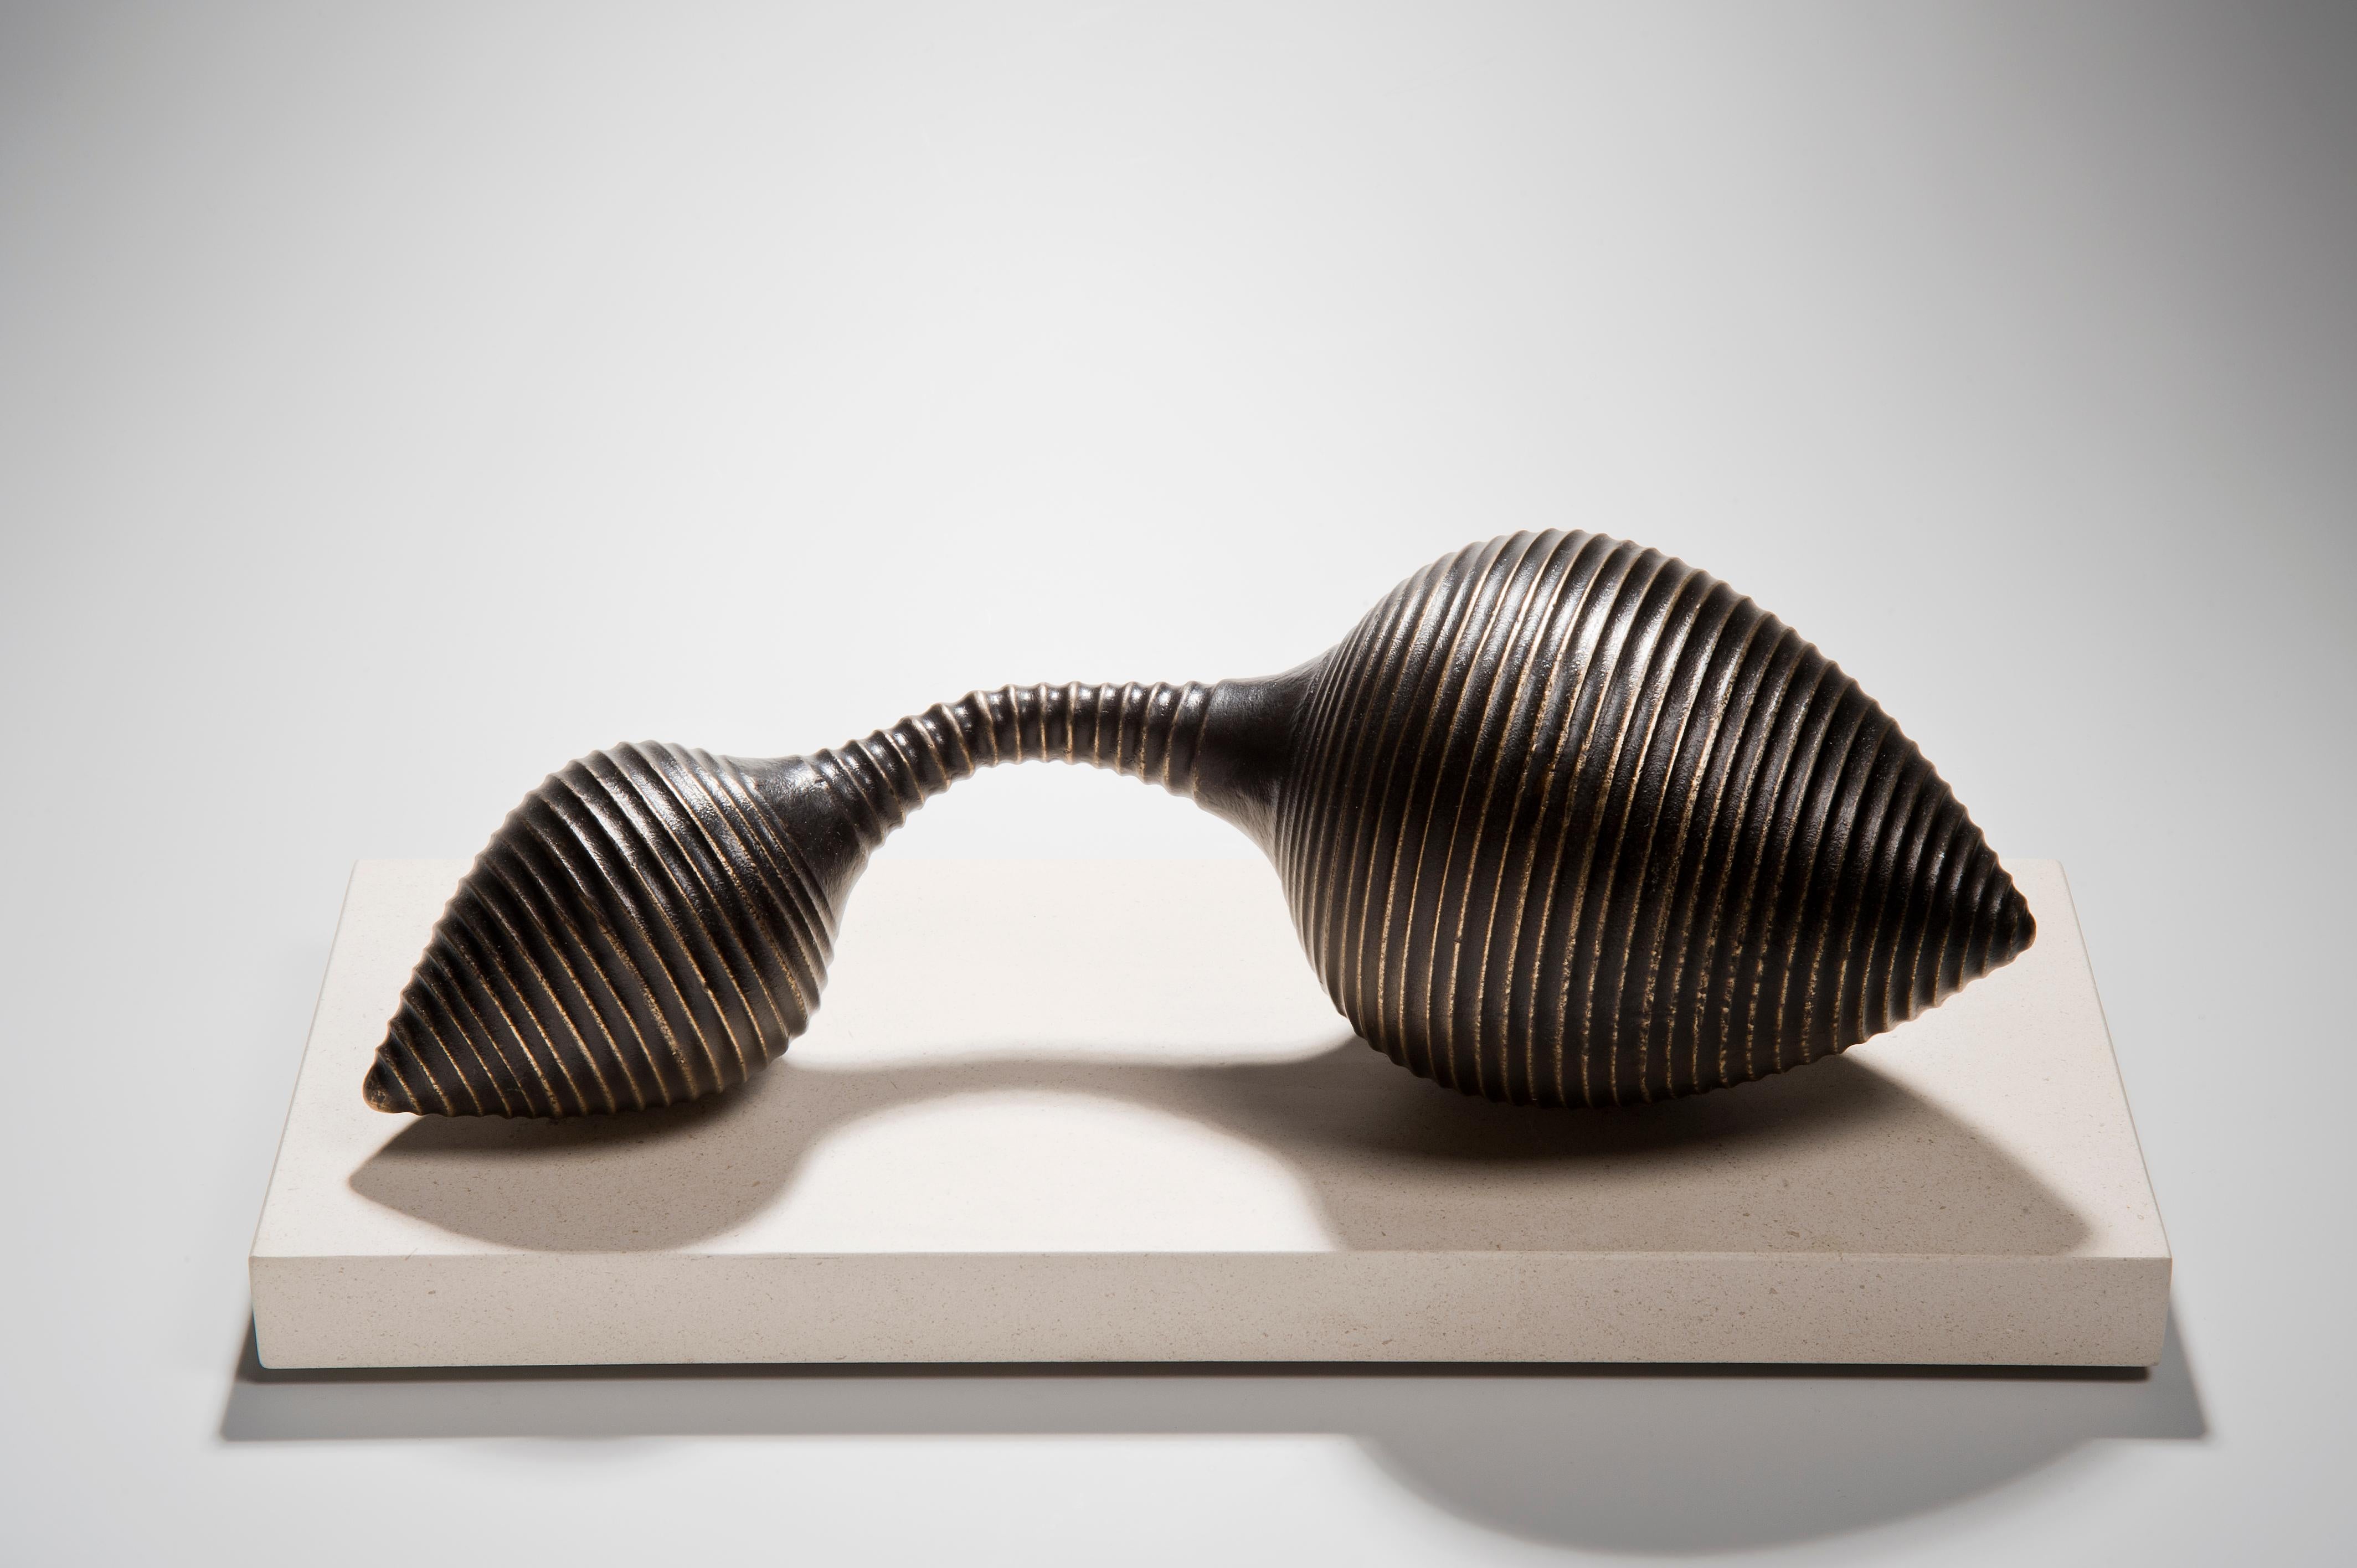 Conical Terminals, limited edition patinated bronze sculpture by Vivienne Foley For Sale 2